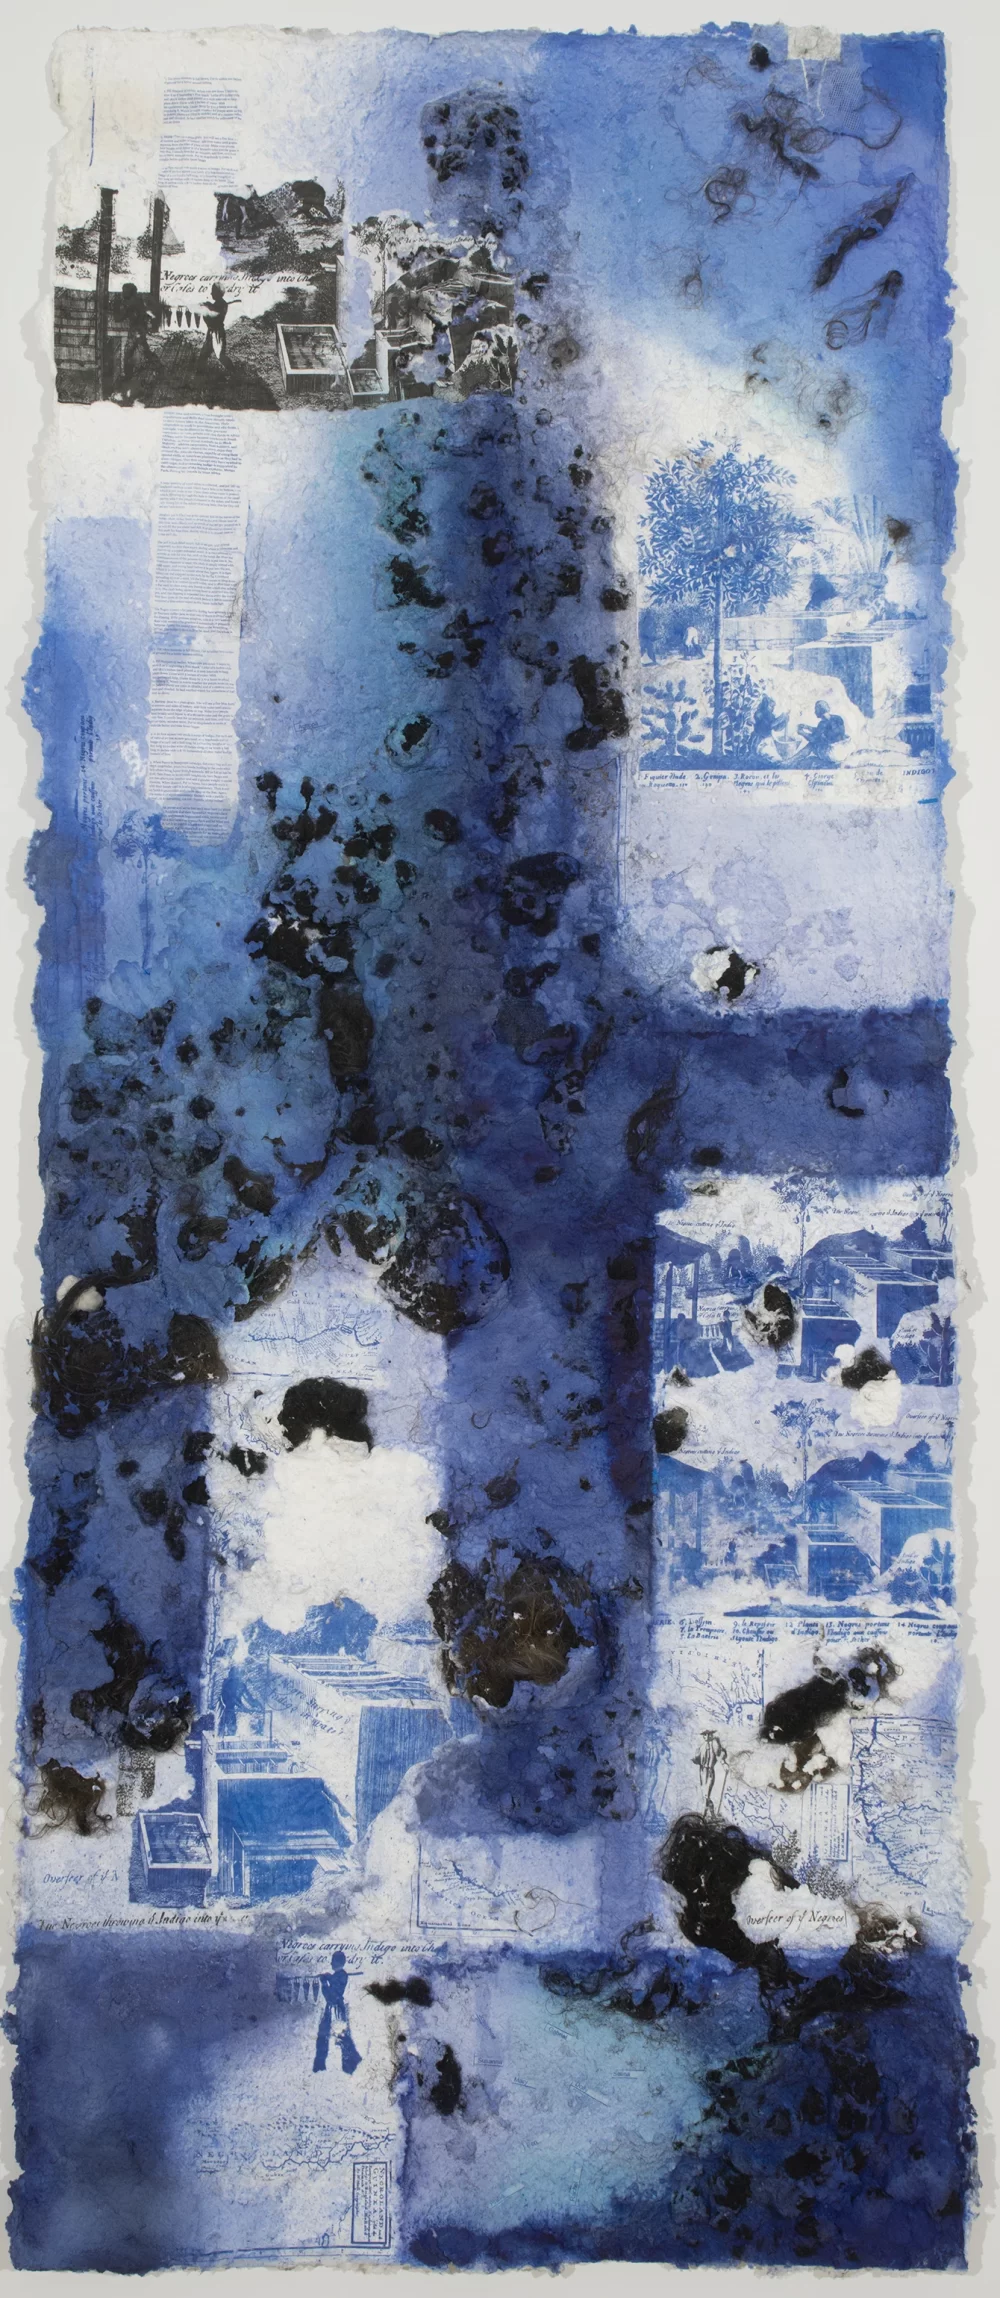 A long rectangular handmade paper panel made of hair and paper pulp and dyed various shades of blue has several printed images on it. The images show houses, a tree, and some illegible text.